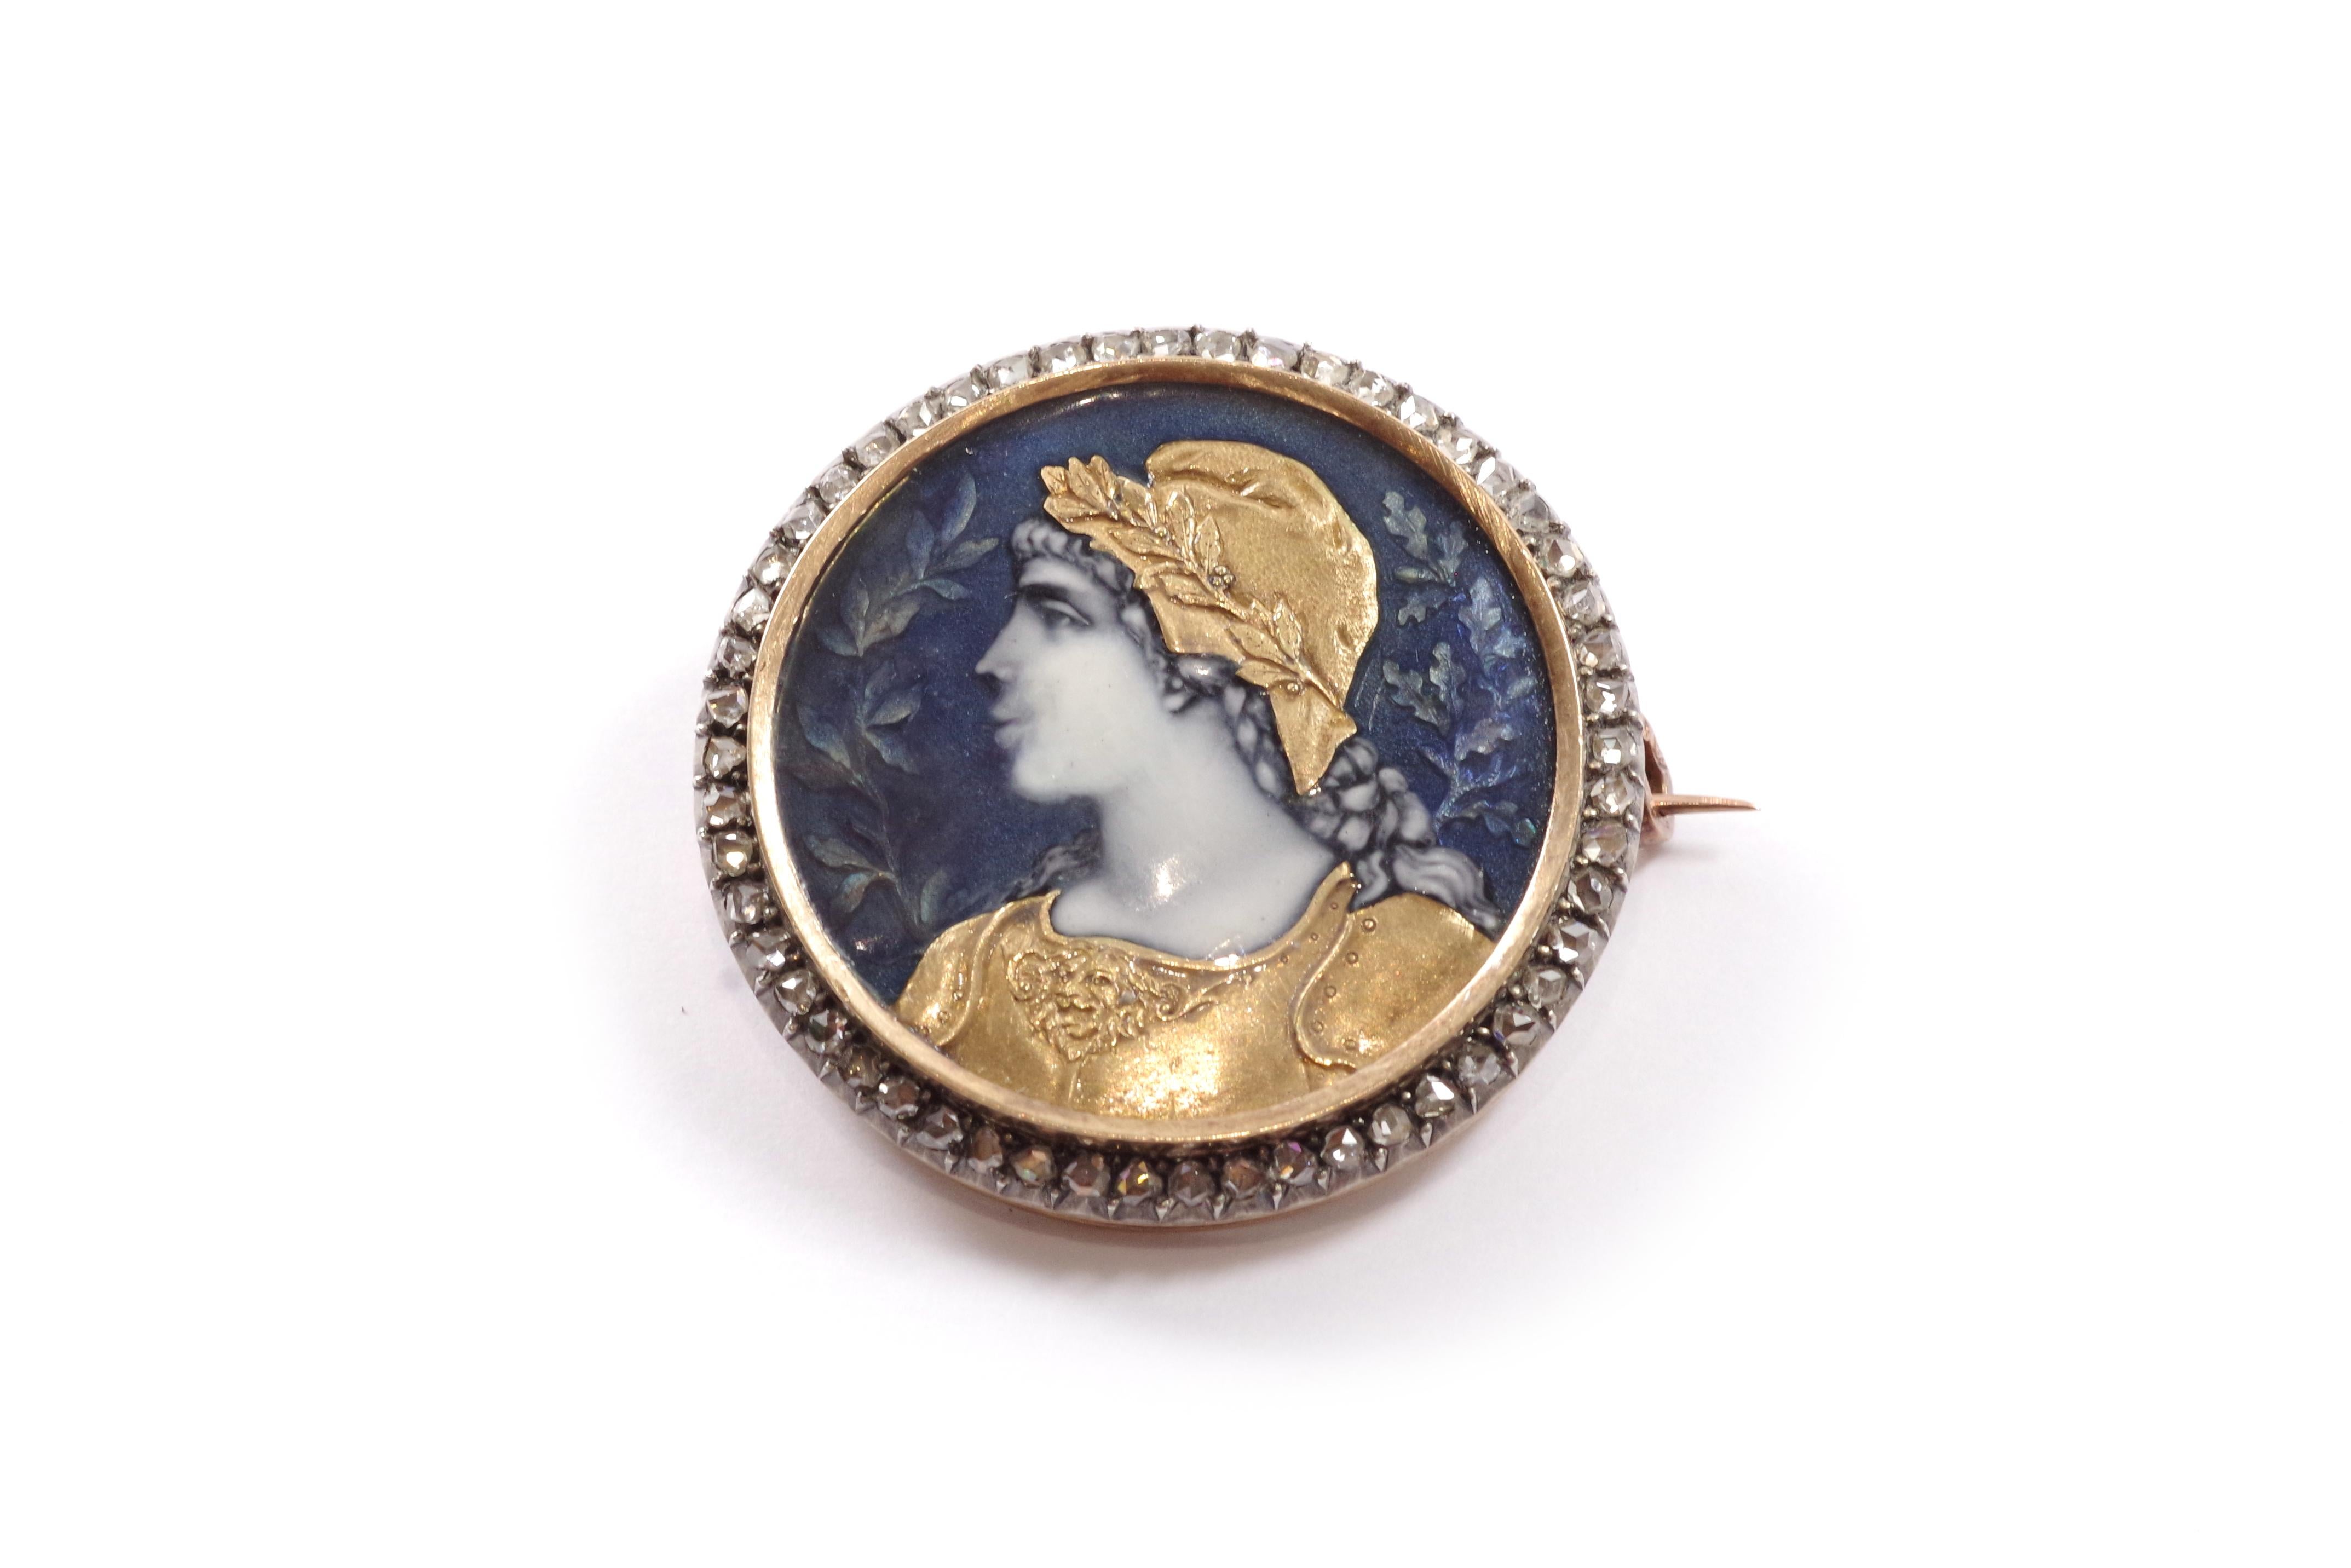 Antique Victorian Marianne brooch in 18 karat rose gold and silver. Antique brooch decorated with an enamelled portrait Marianne (French symbol) wearing a Phrygian cap topped with a laurel wreath. The portrait is set off by a surround of rose-cut